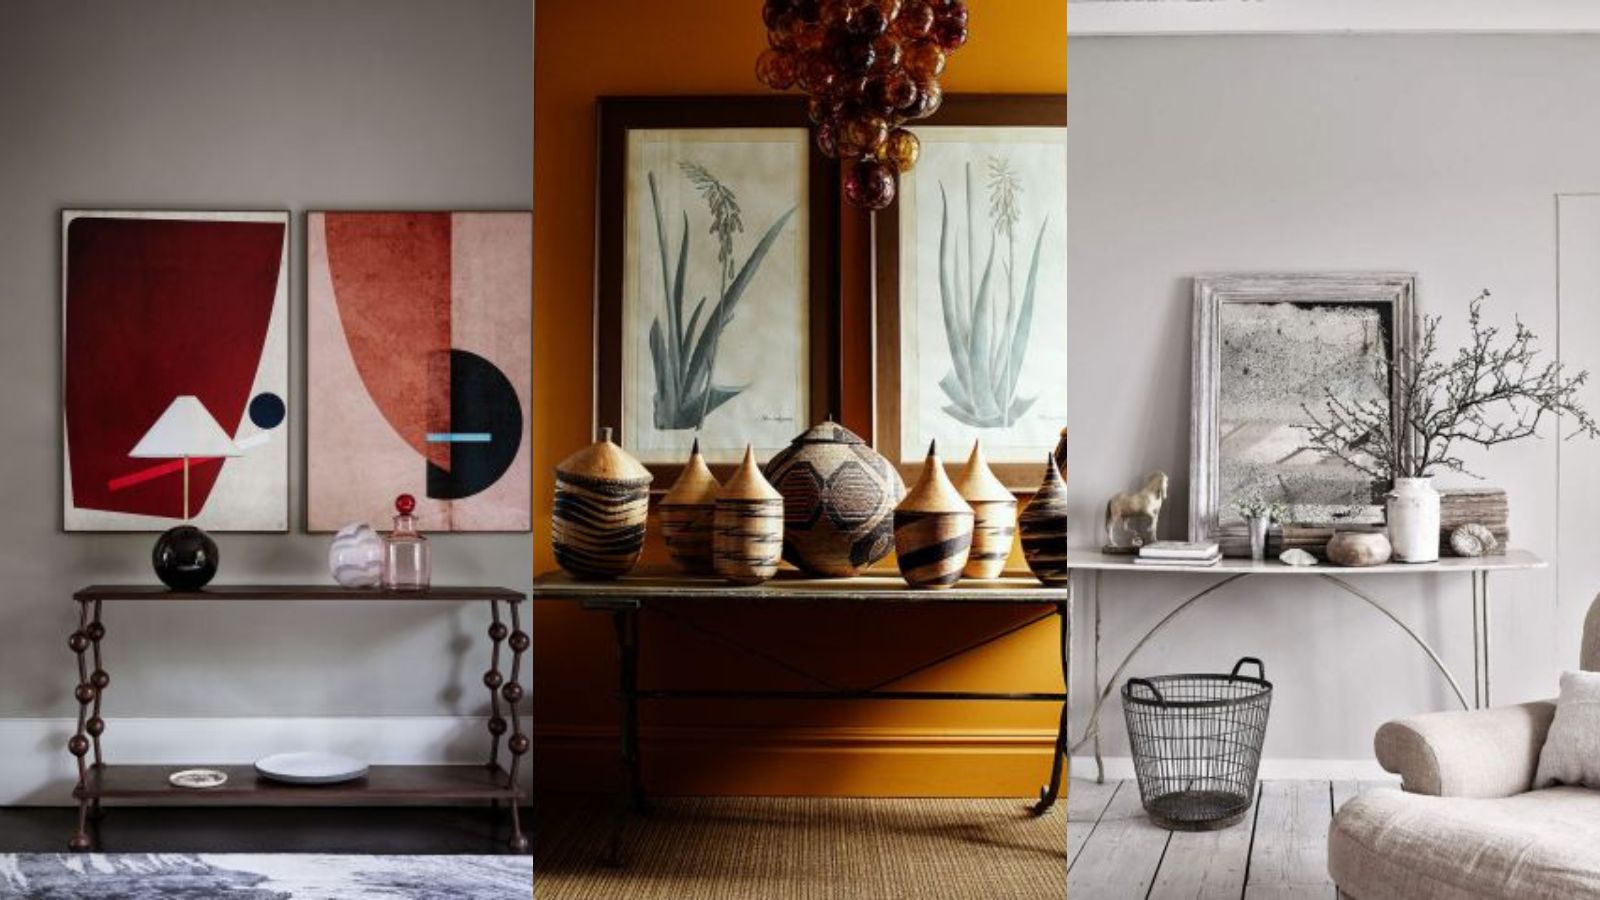 How to style a console table: 18 ideas for entryways and more